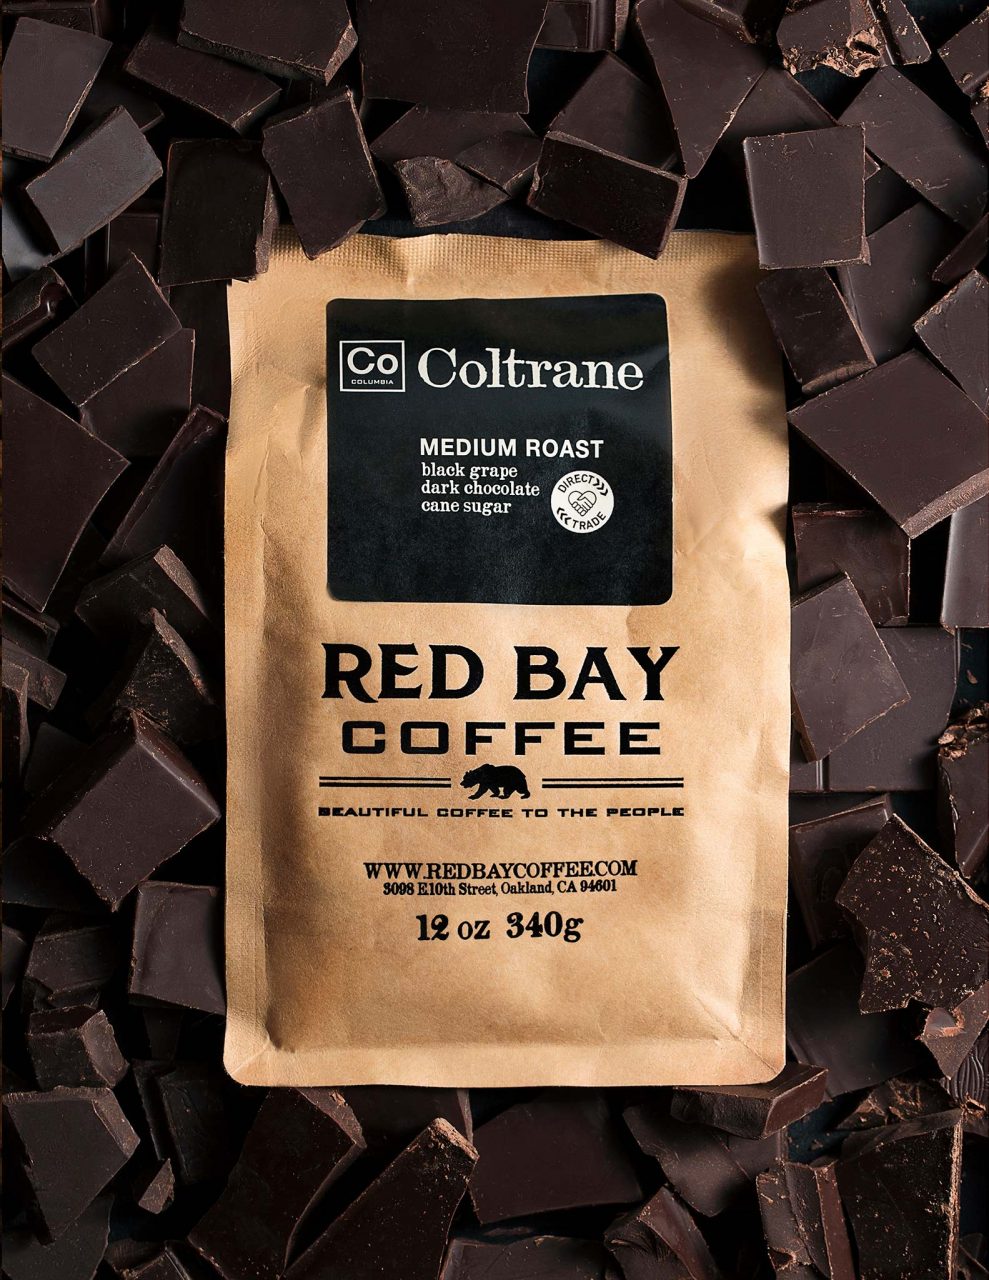 Red Bay Coffee Unique Tasting Notes